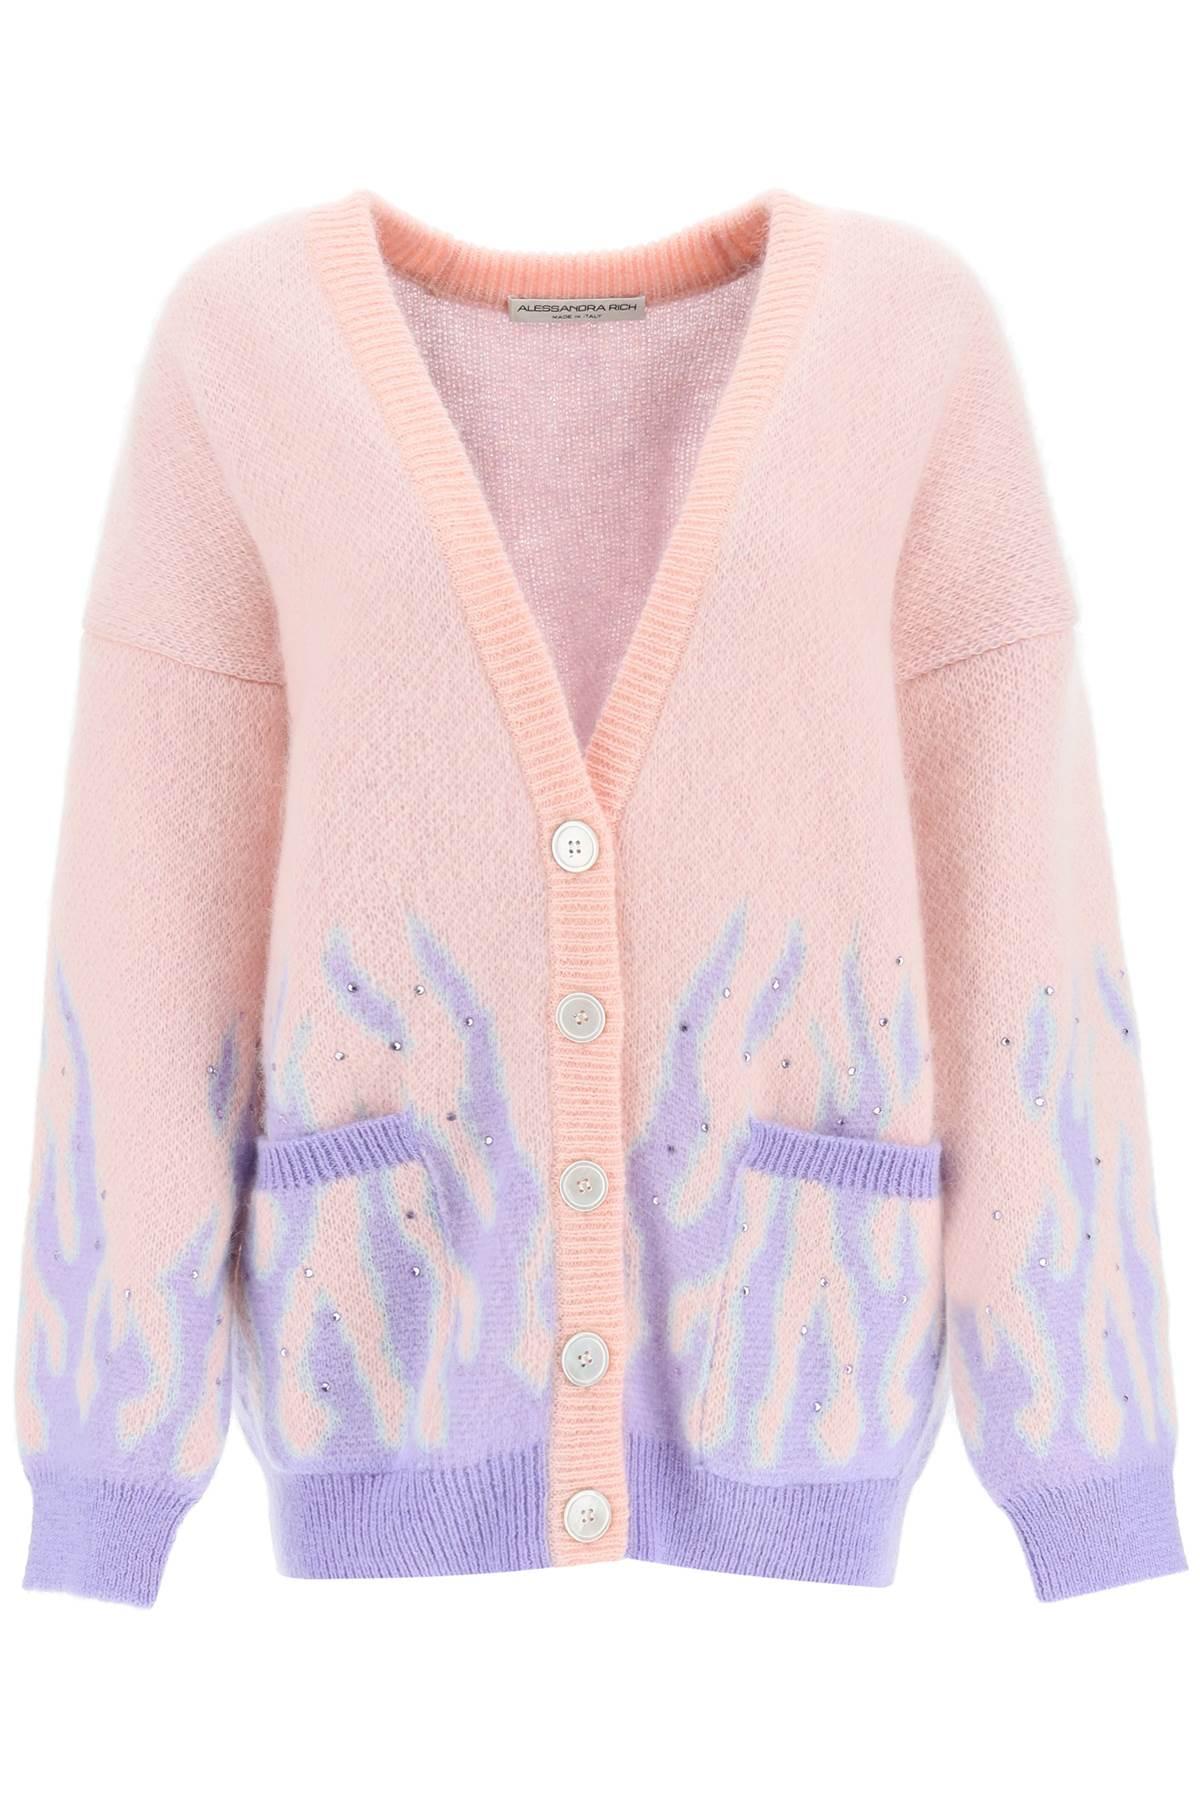 ALESSANDRA RICH MOHAIR-BLEND 'FLAME' CARDIGAN